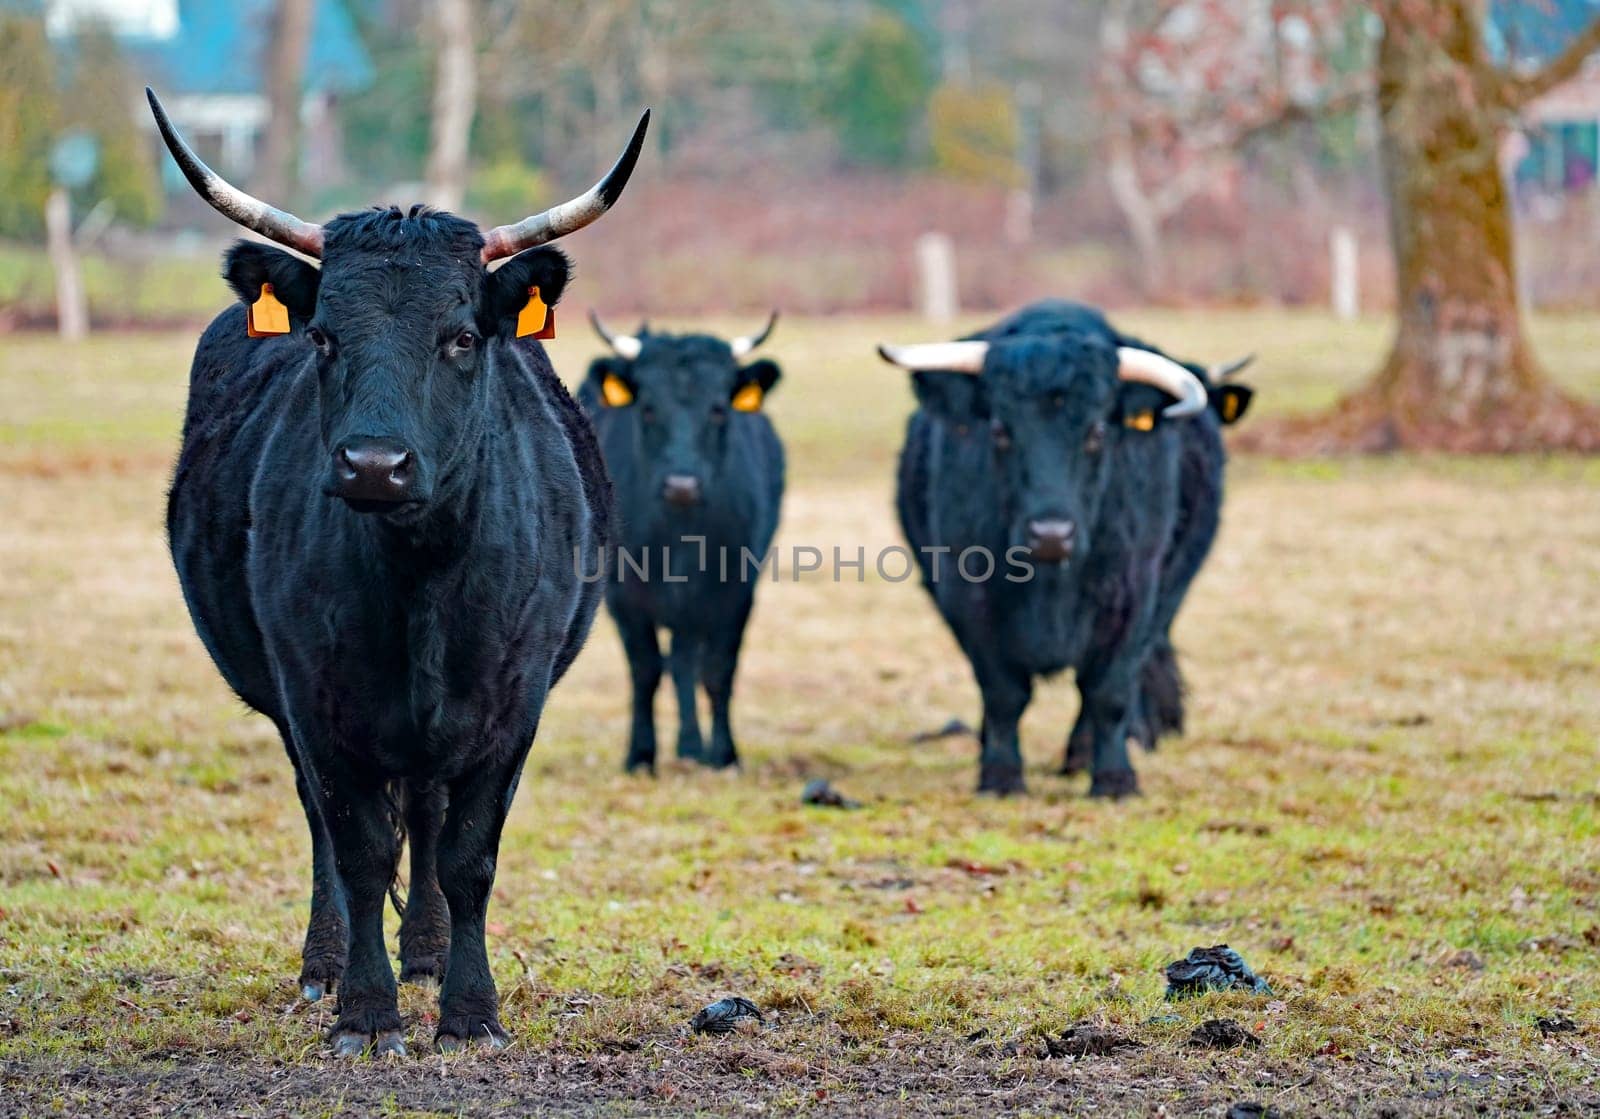 Three visible black Dexter cows and one hidden. Dexter cattle are a breed of cattle originating in Ireland. Dexters are classified as a small, friendly, dual-purpose breed, used for milk and beef